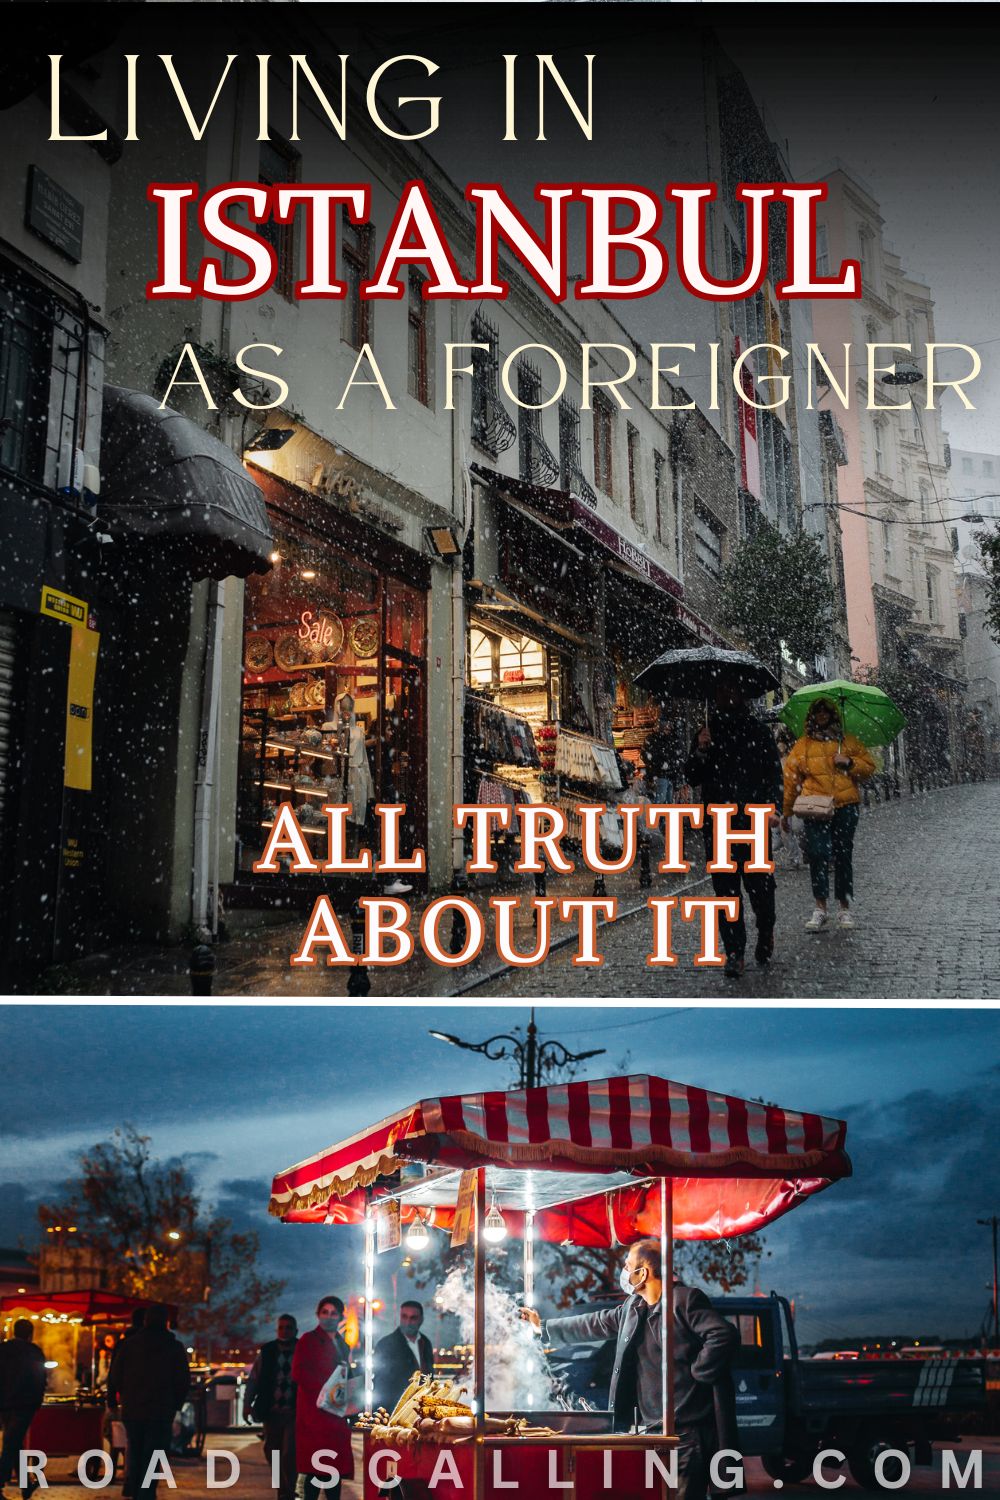 Life in Istanbul for foreigners